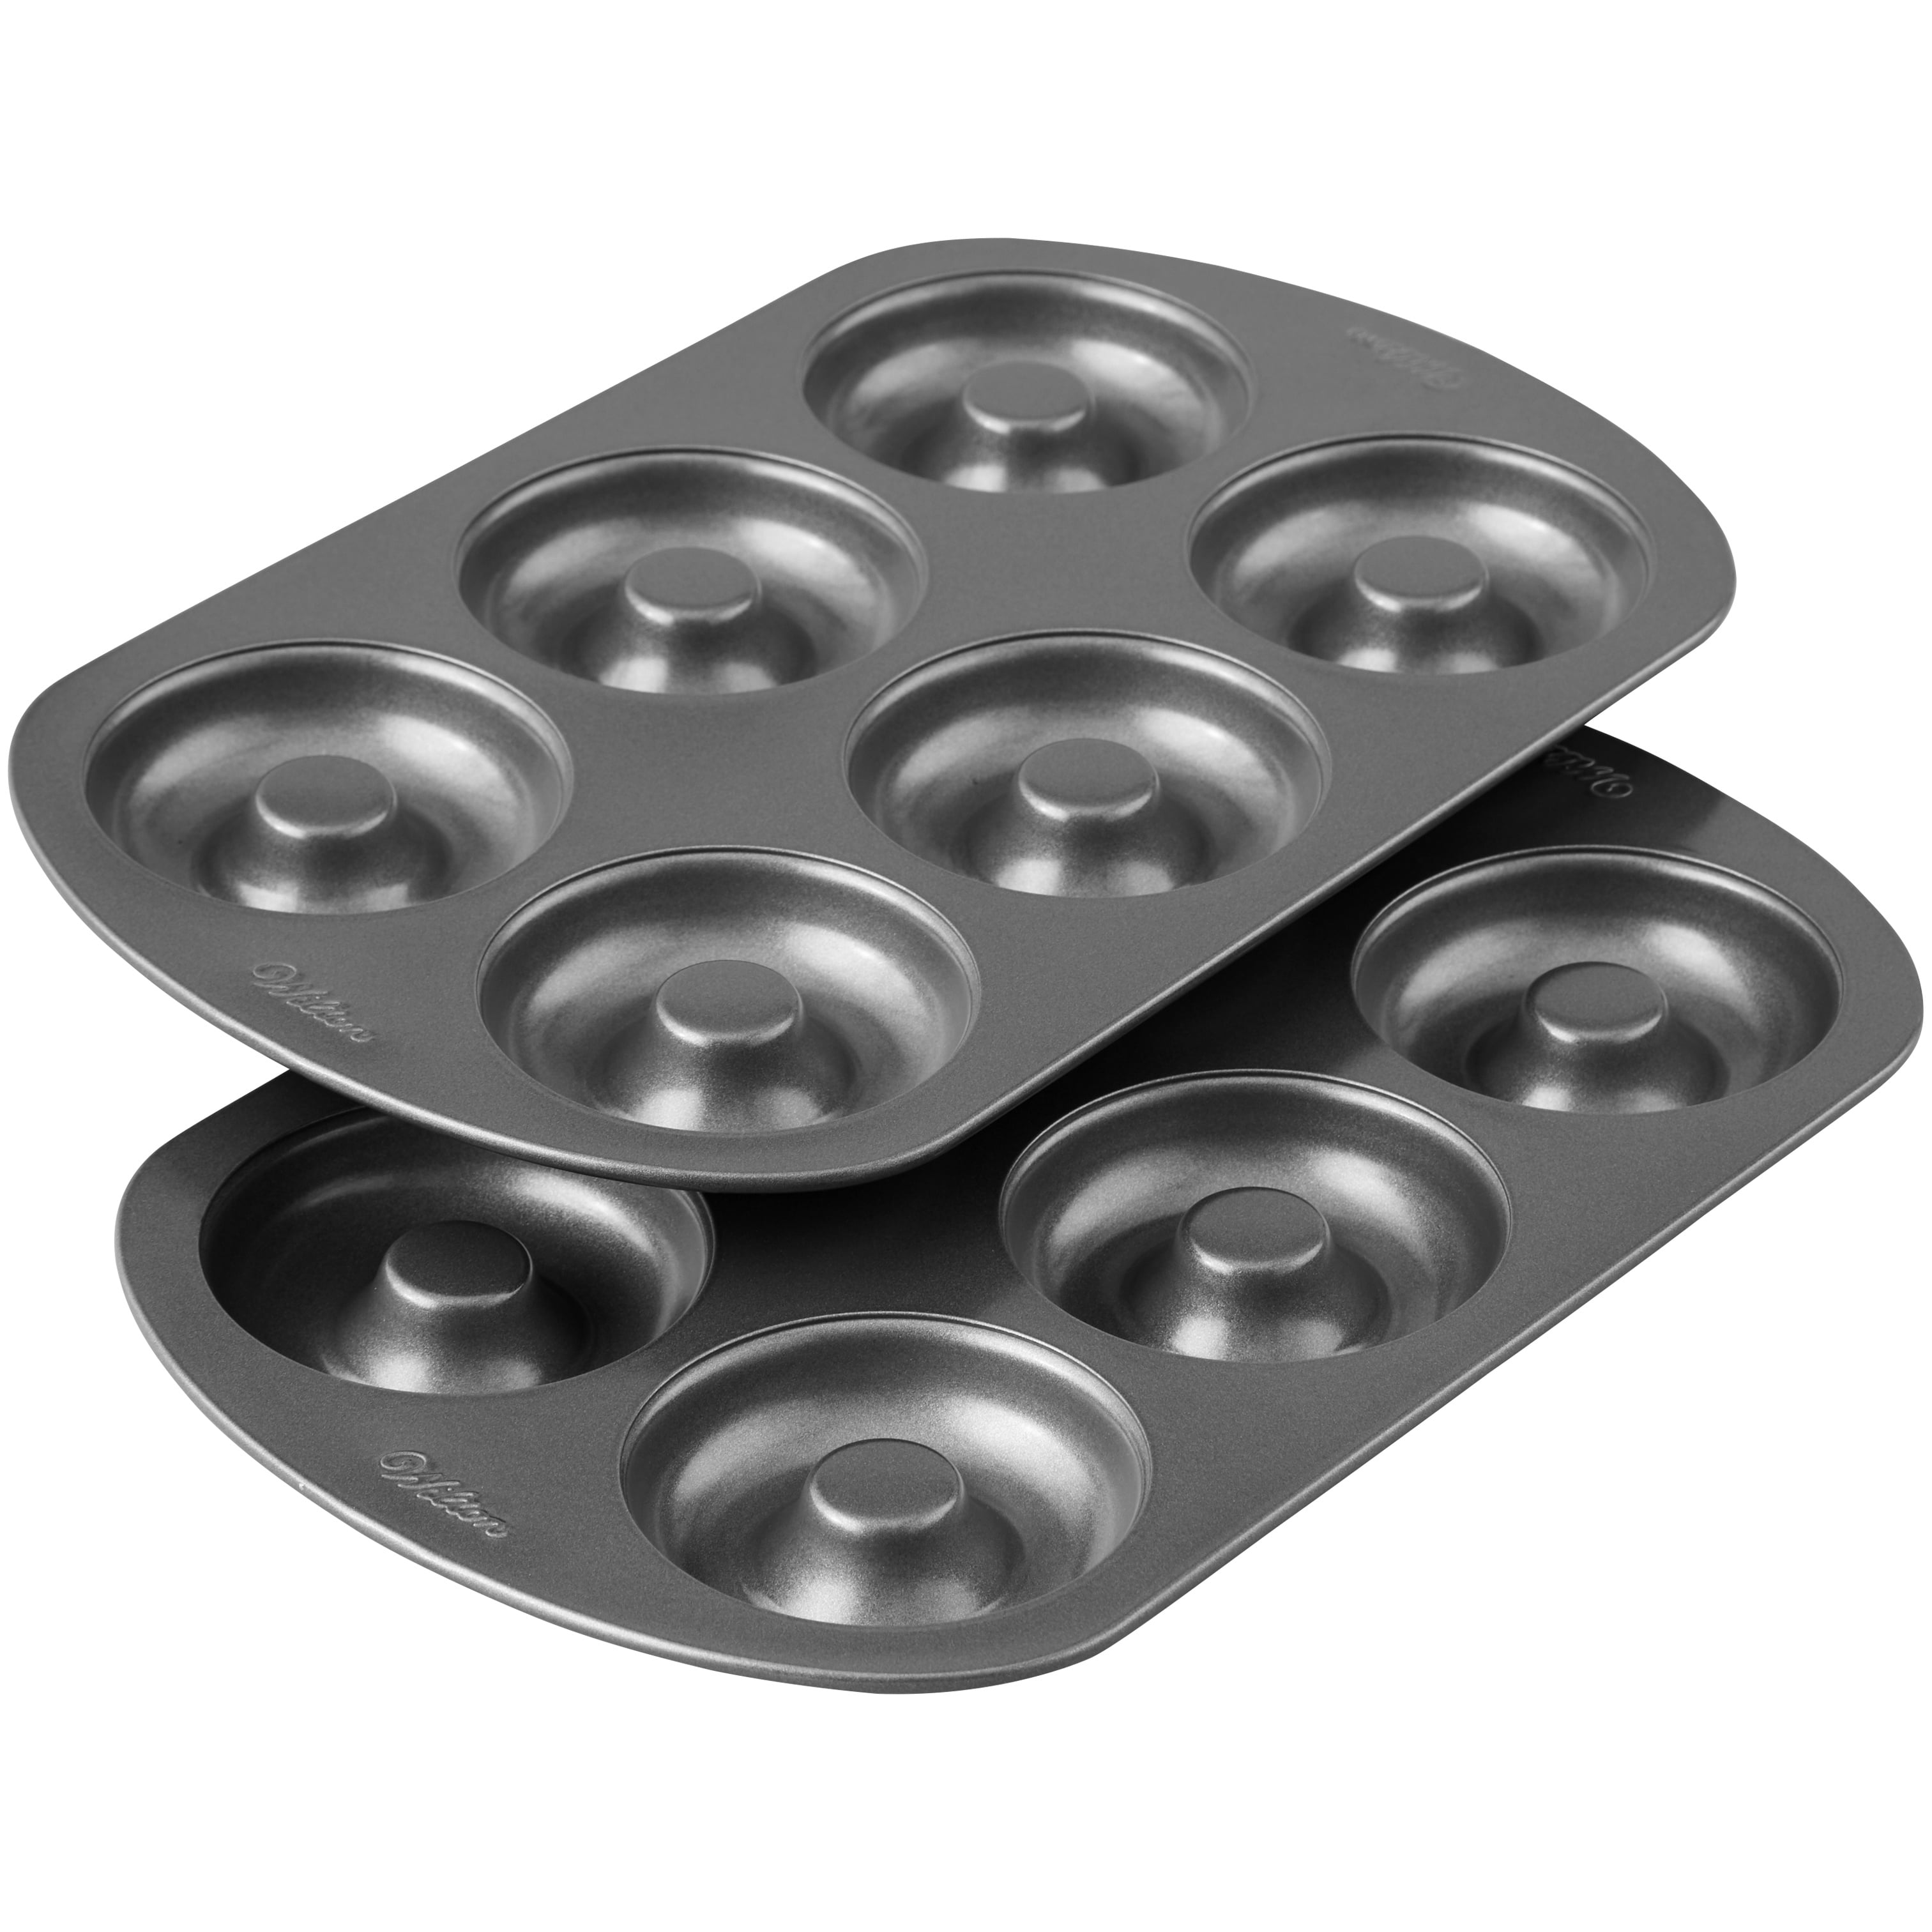 Set of 3 Makes Individual Full-Sized 3 1/4 Donuts Non-Stick 6-Cavity Donut Baking Pans 